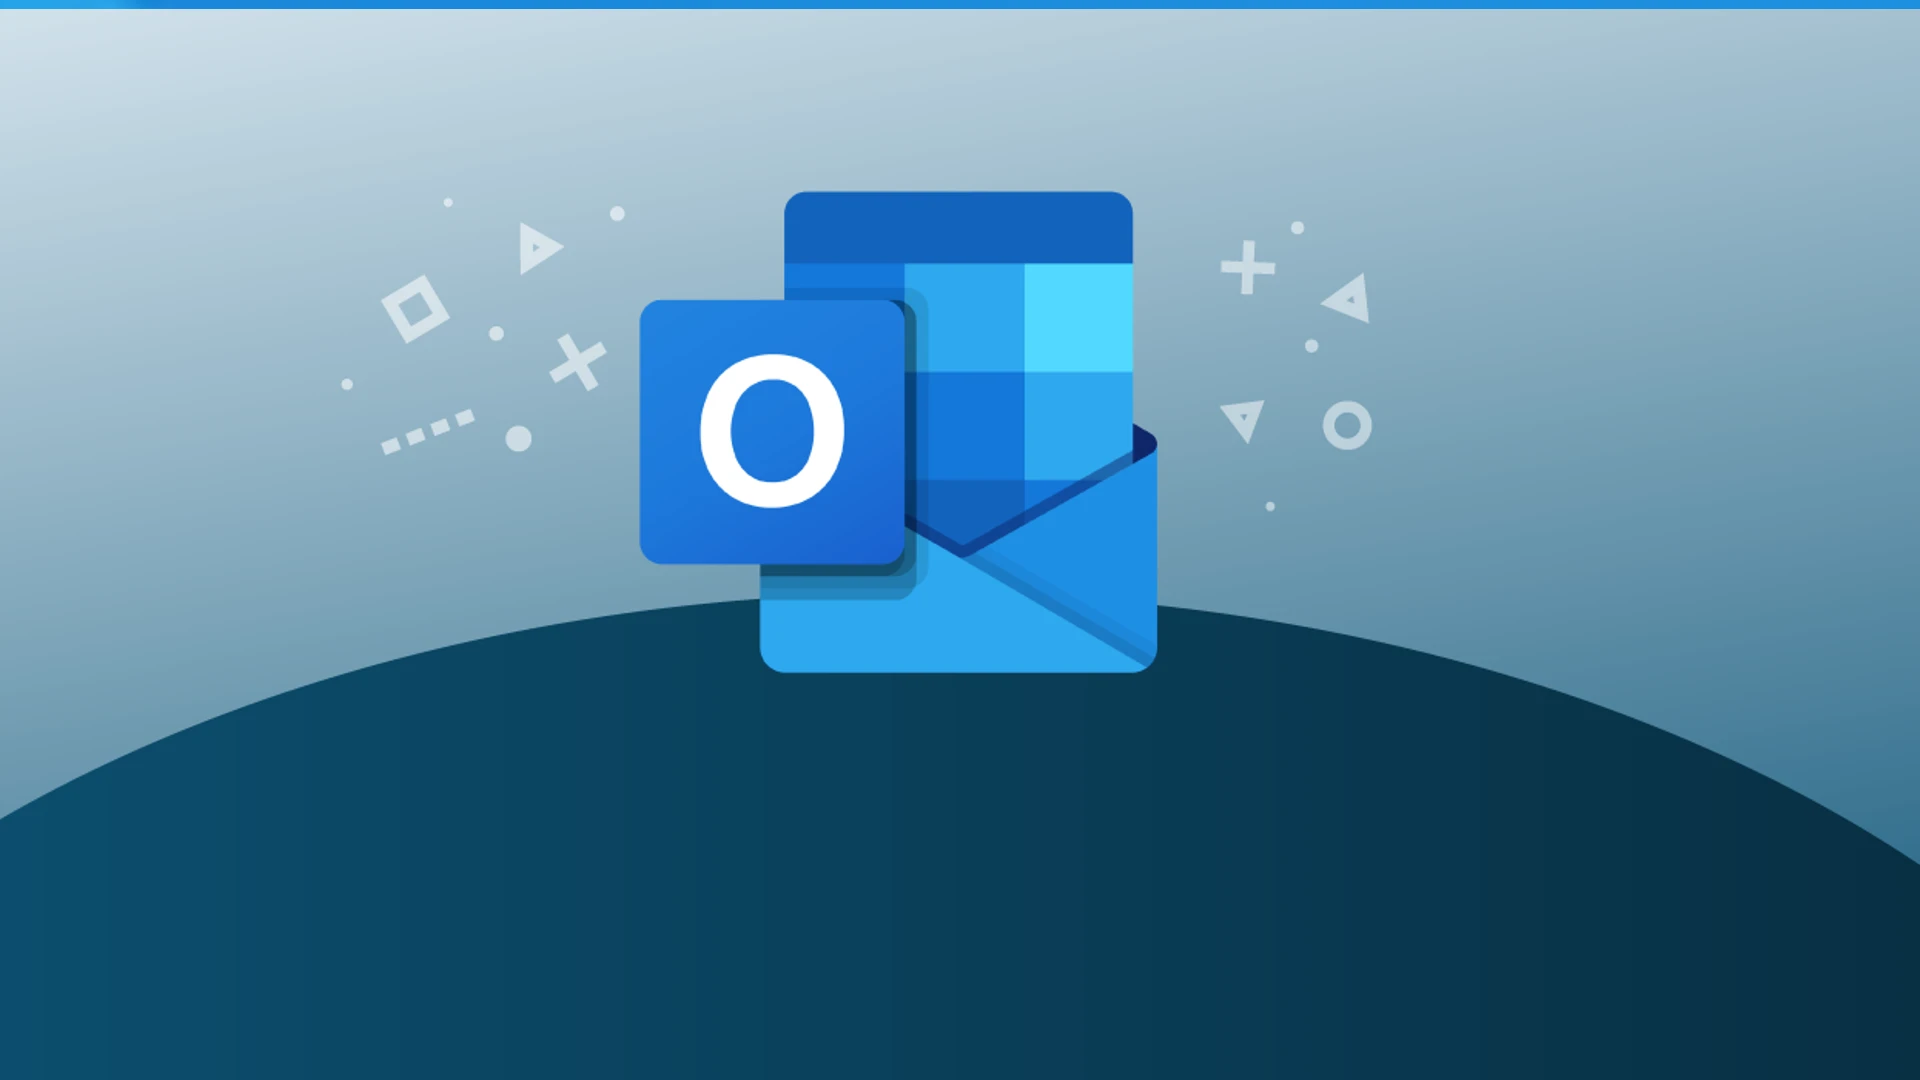 Microsoft gets aggressive with ads in the Outlook app